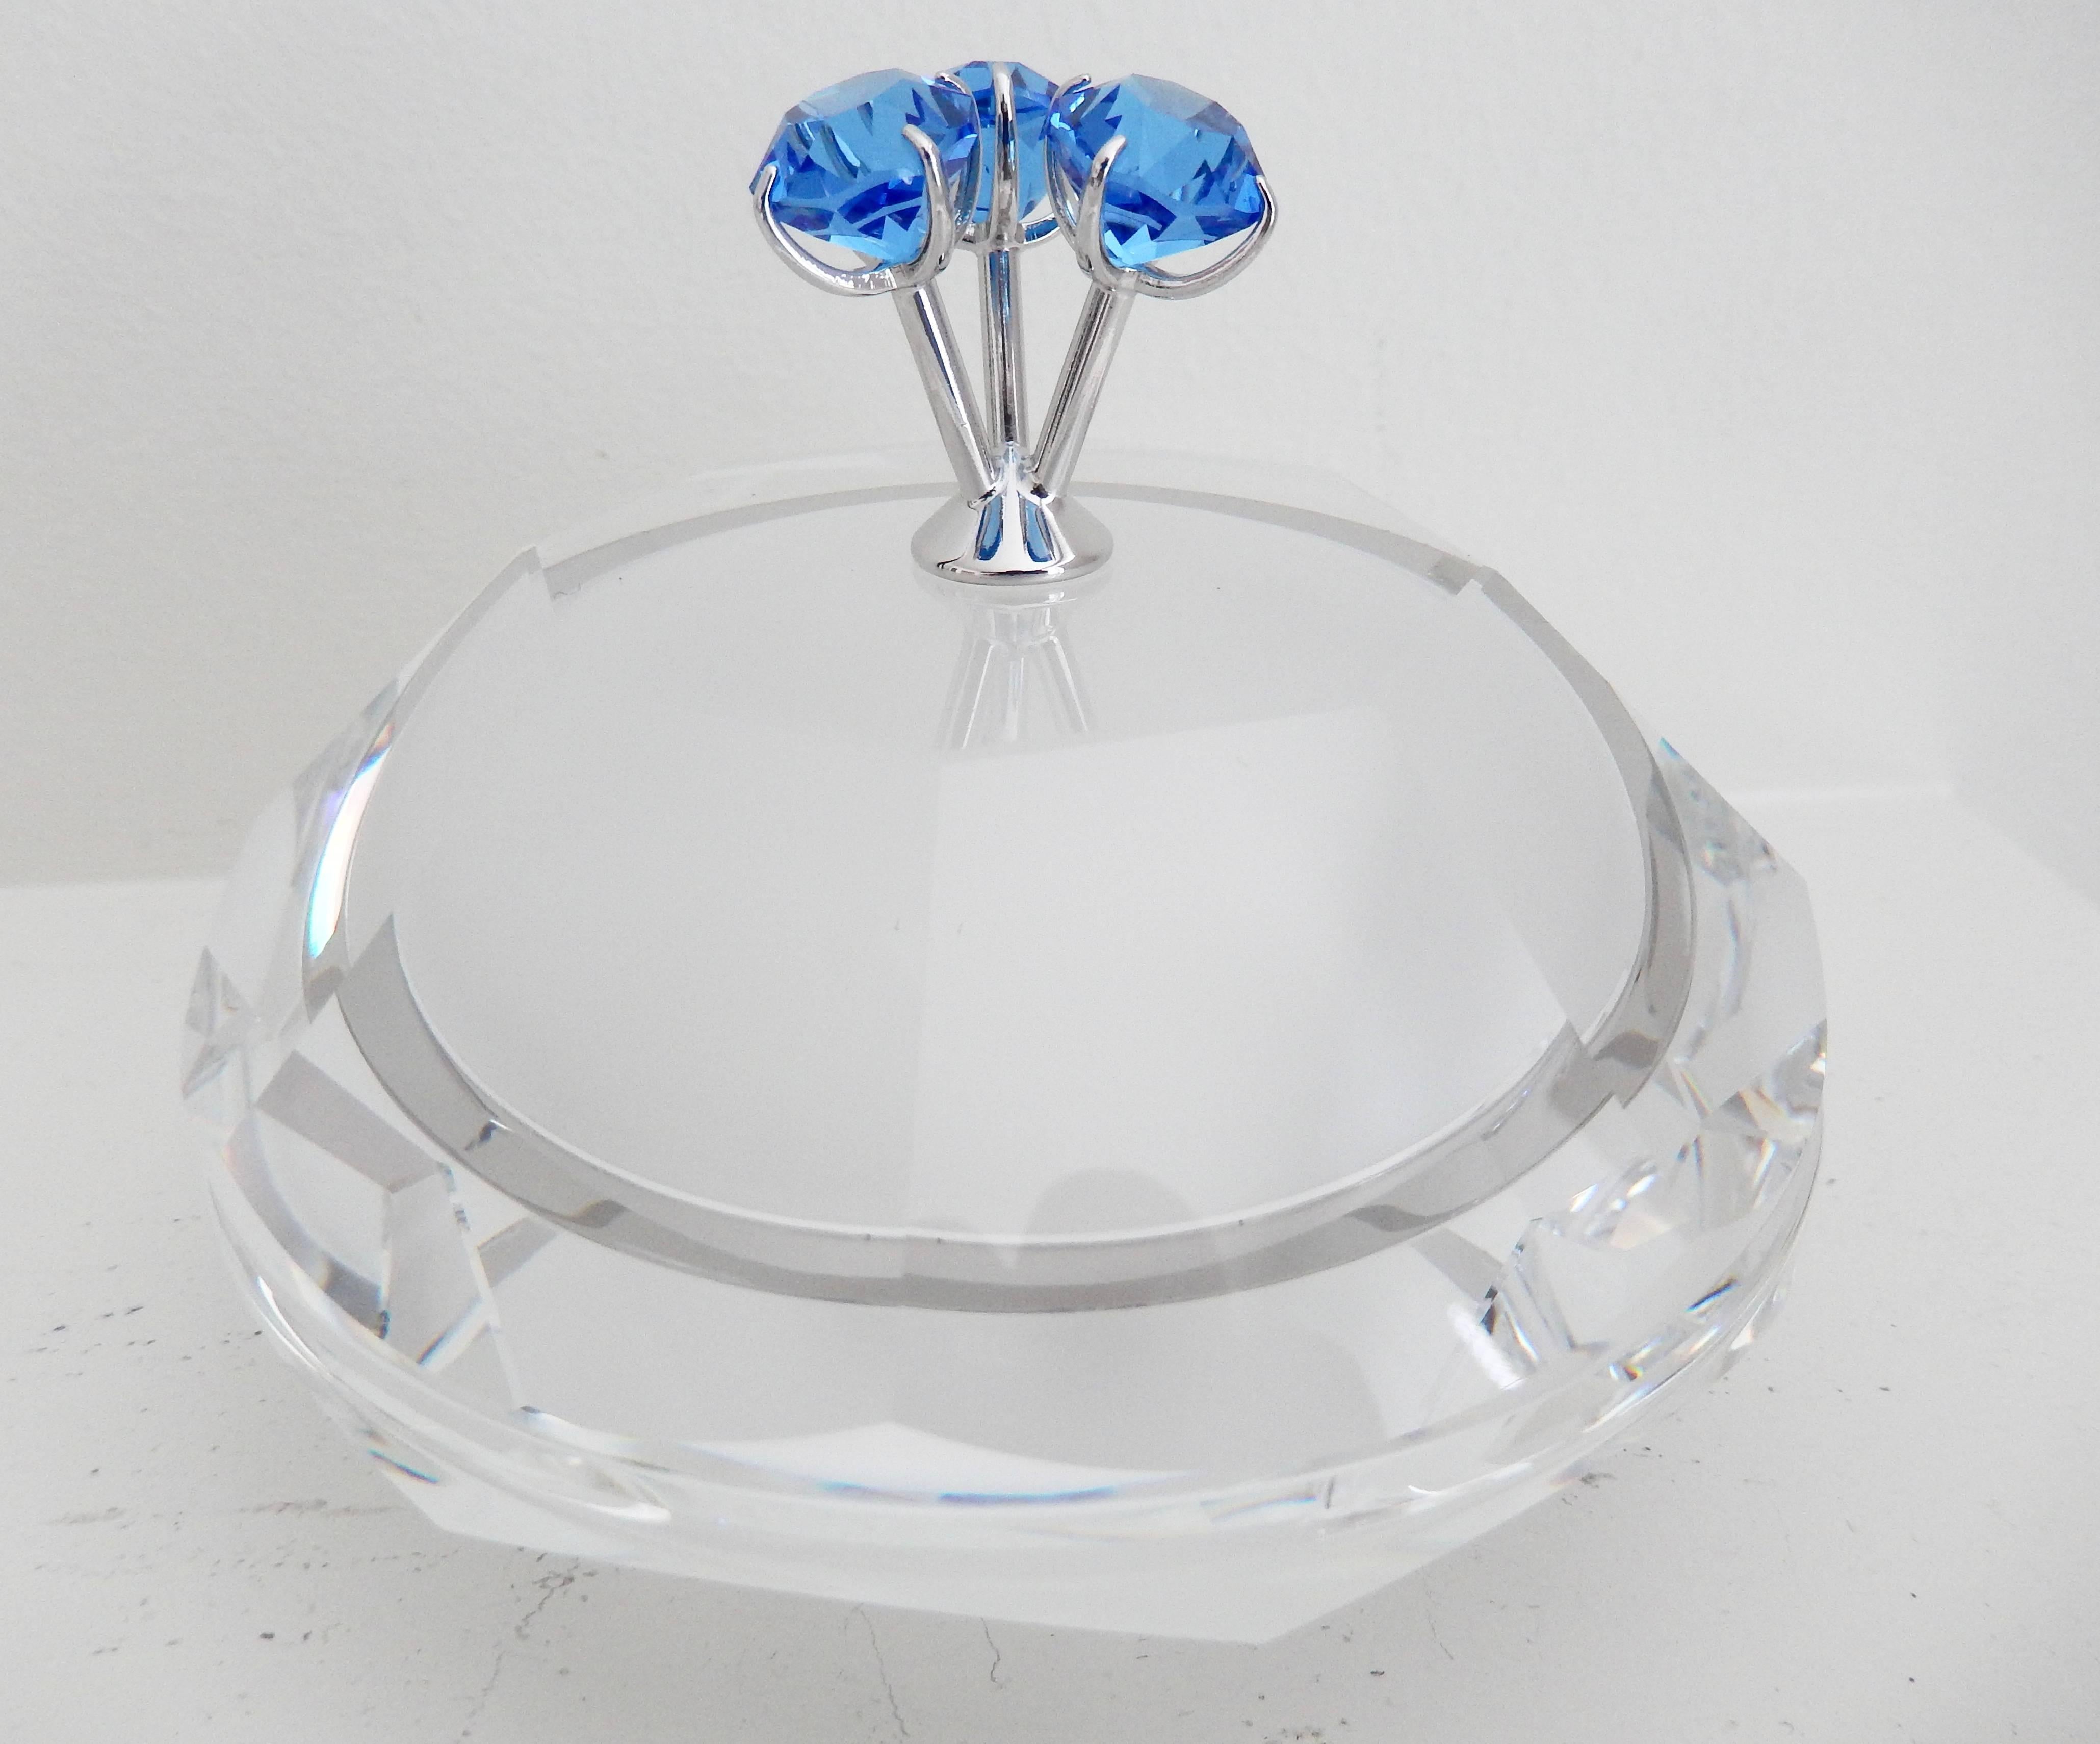 A sumptuous lidded box by the French design legend Andree Putman (1925-2013) for Swarovski crystal. The lid is adorned with three sapphire-colored crystals resembling space pods. Faceted crystal with a satin interior finish, simple but luxurious.